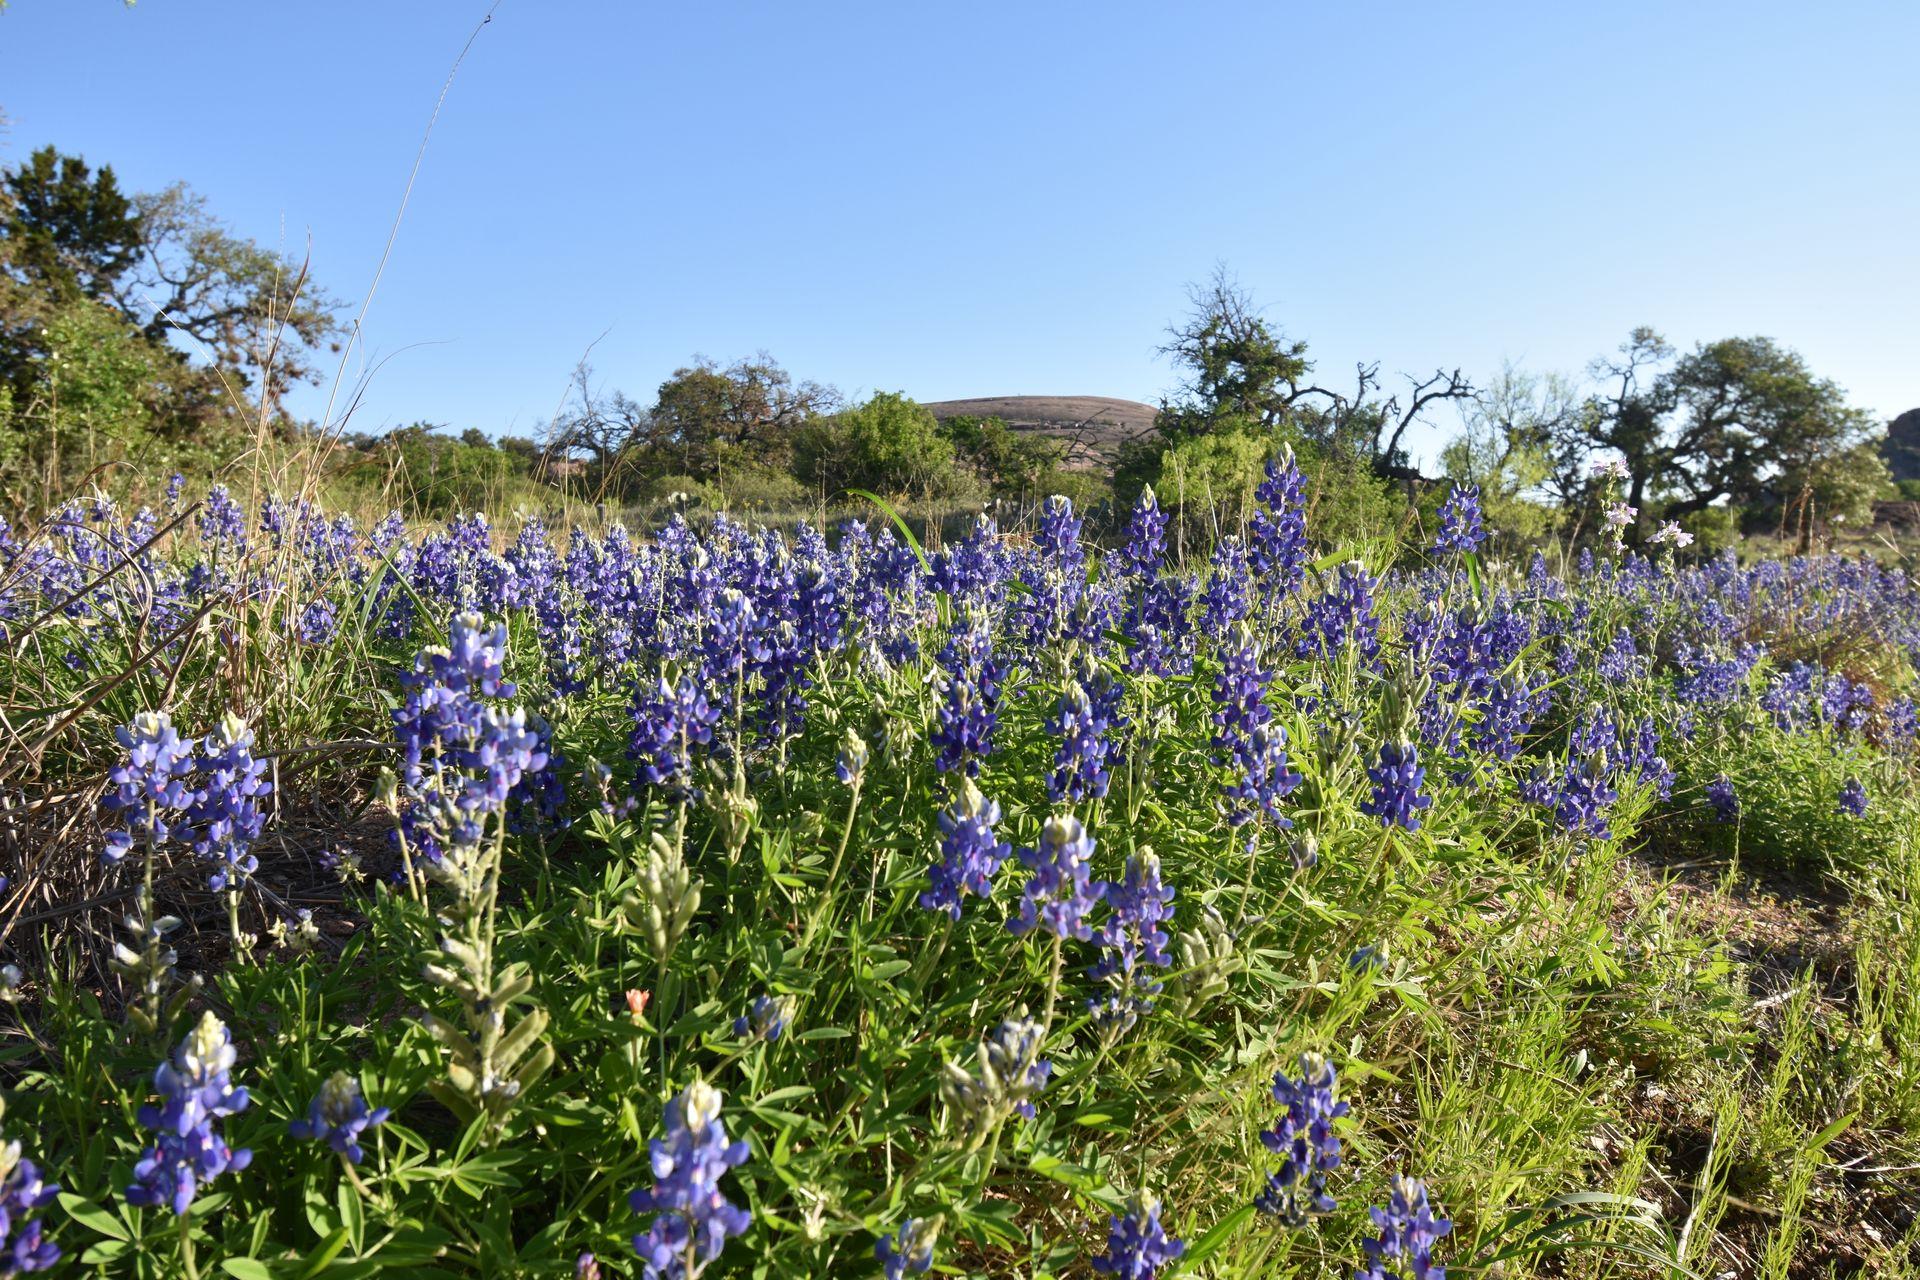 A close up of several bluebonnet flowers with Enchanted Rock in the background.